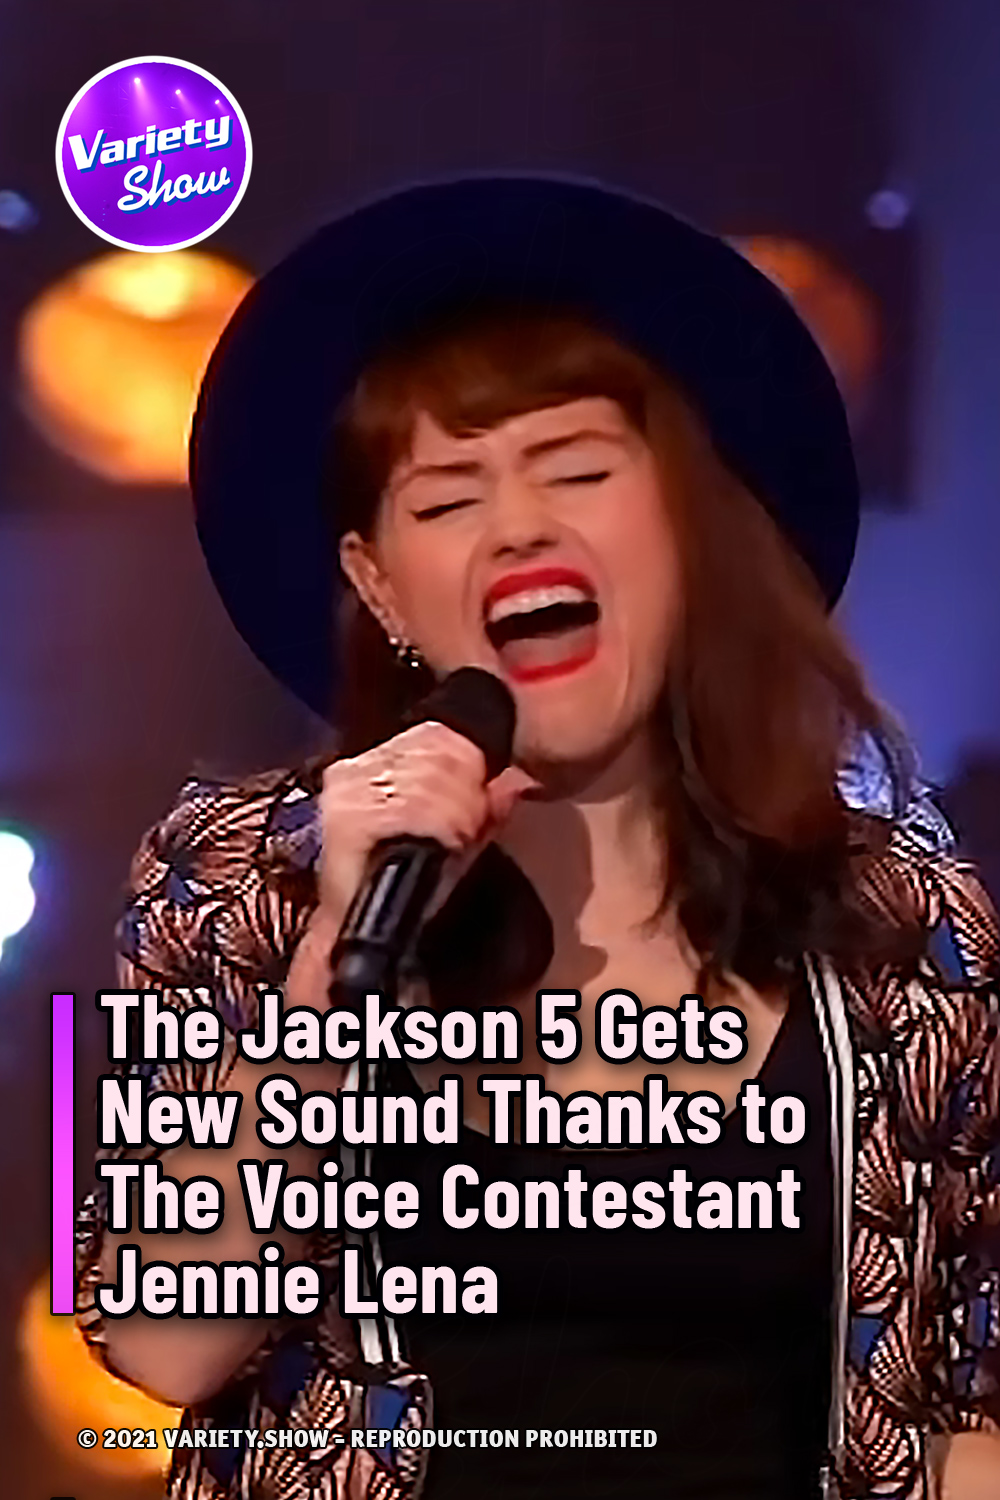 The Jackson 5 Gets New Sound Thanks to The Voice Contestant Jennie Lena